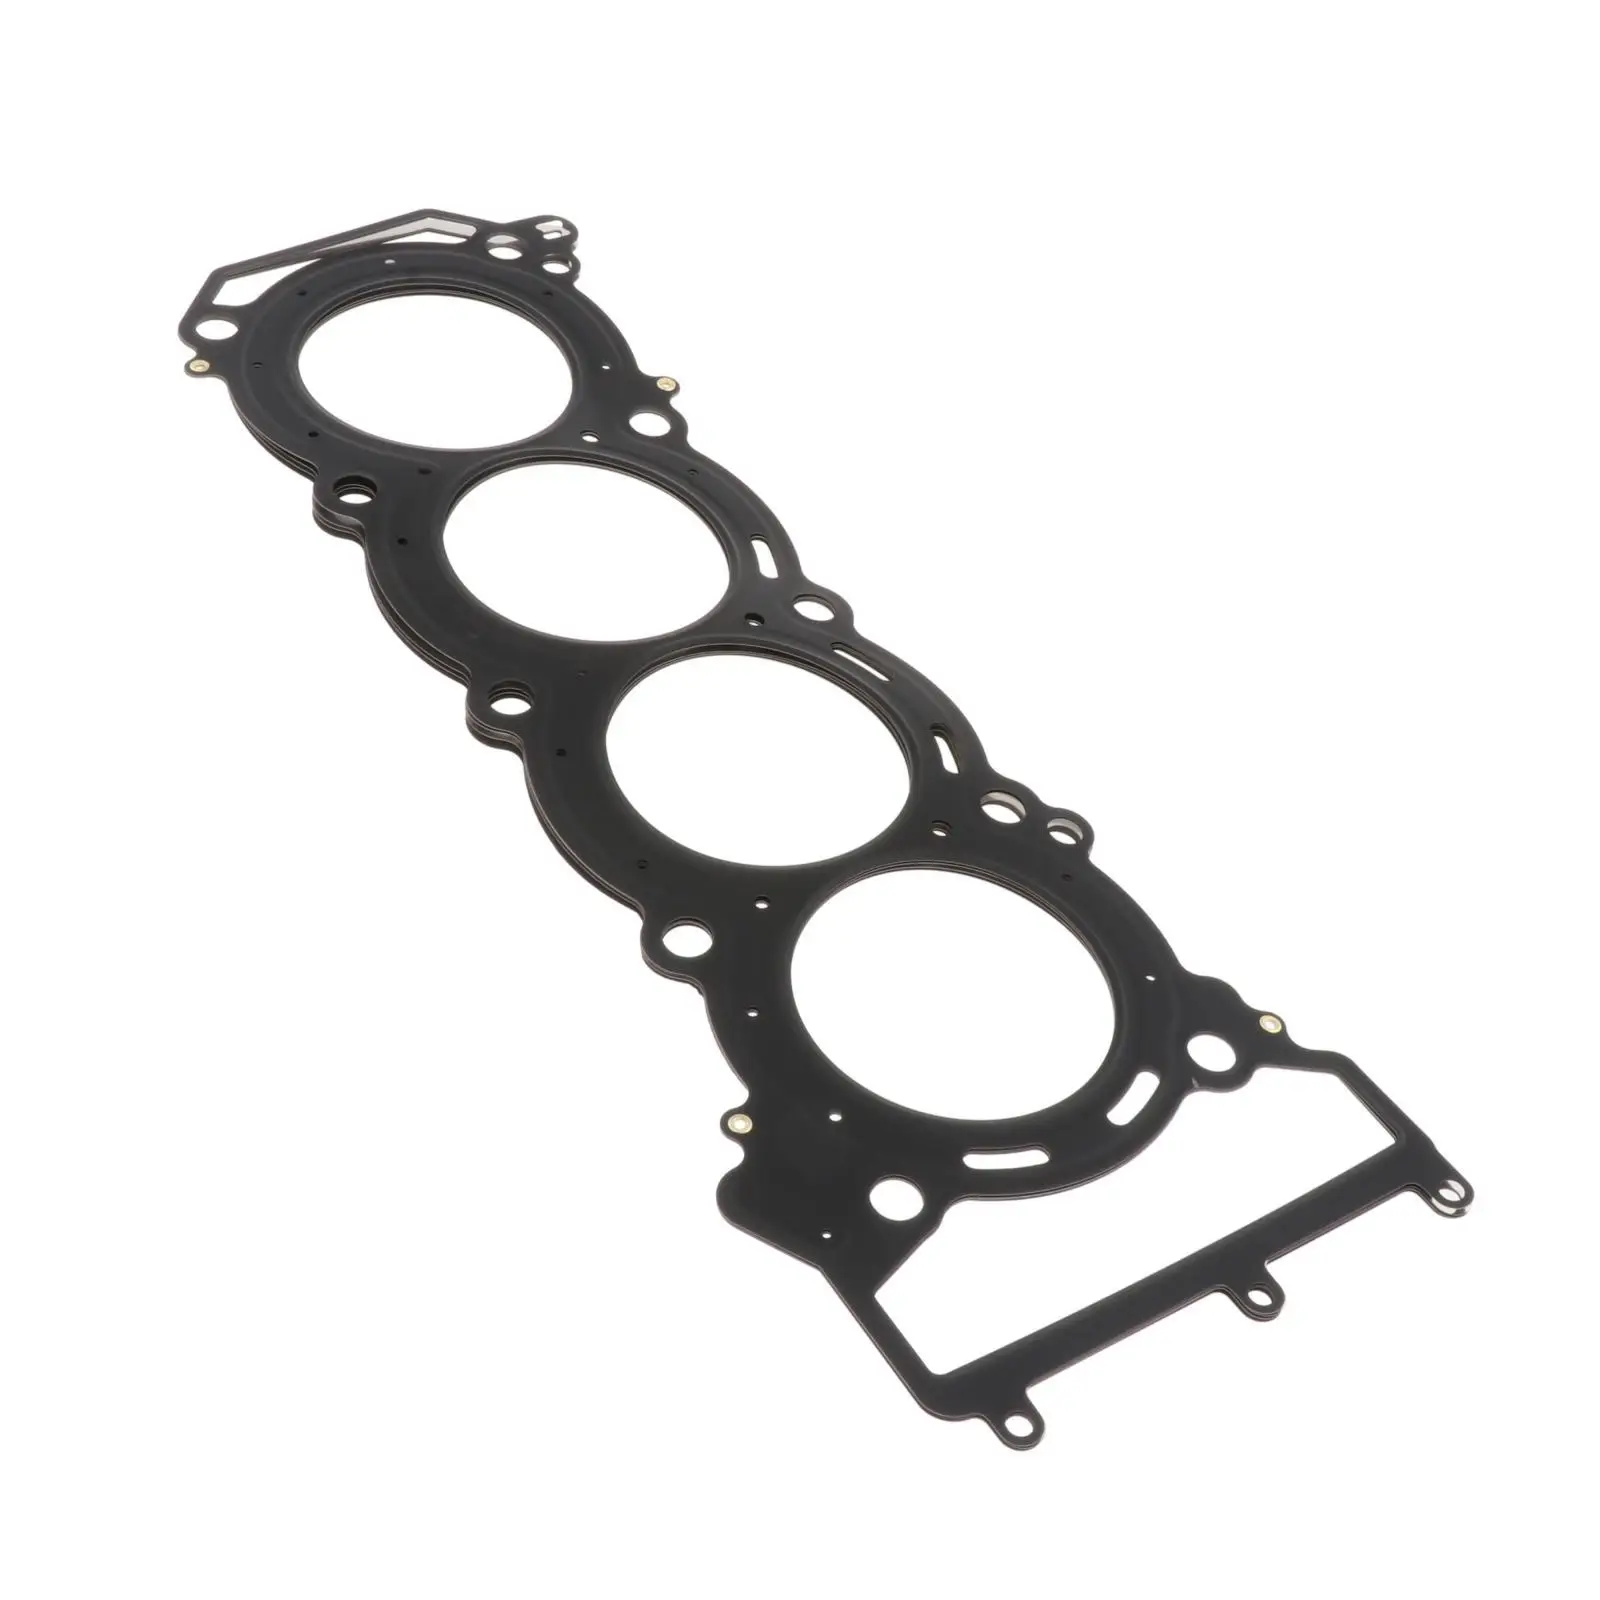 Cylinder Head Gasket Fit for   FX SHO (1.8L) 6BH-11181-00-00 Acc